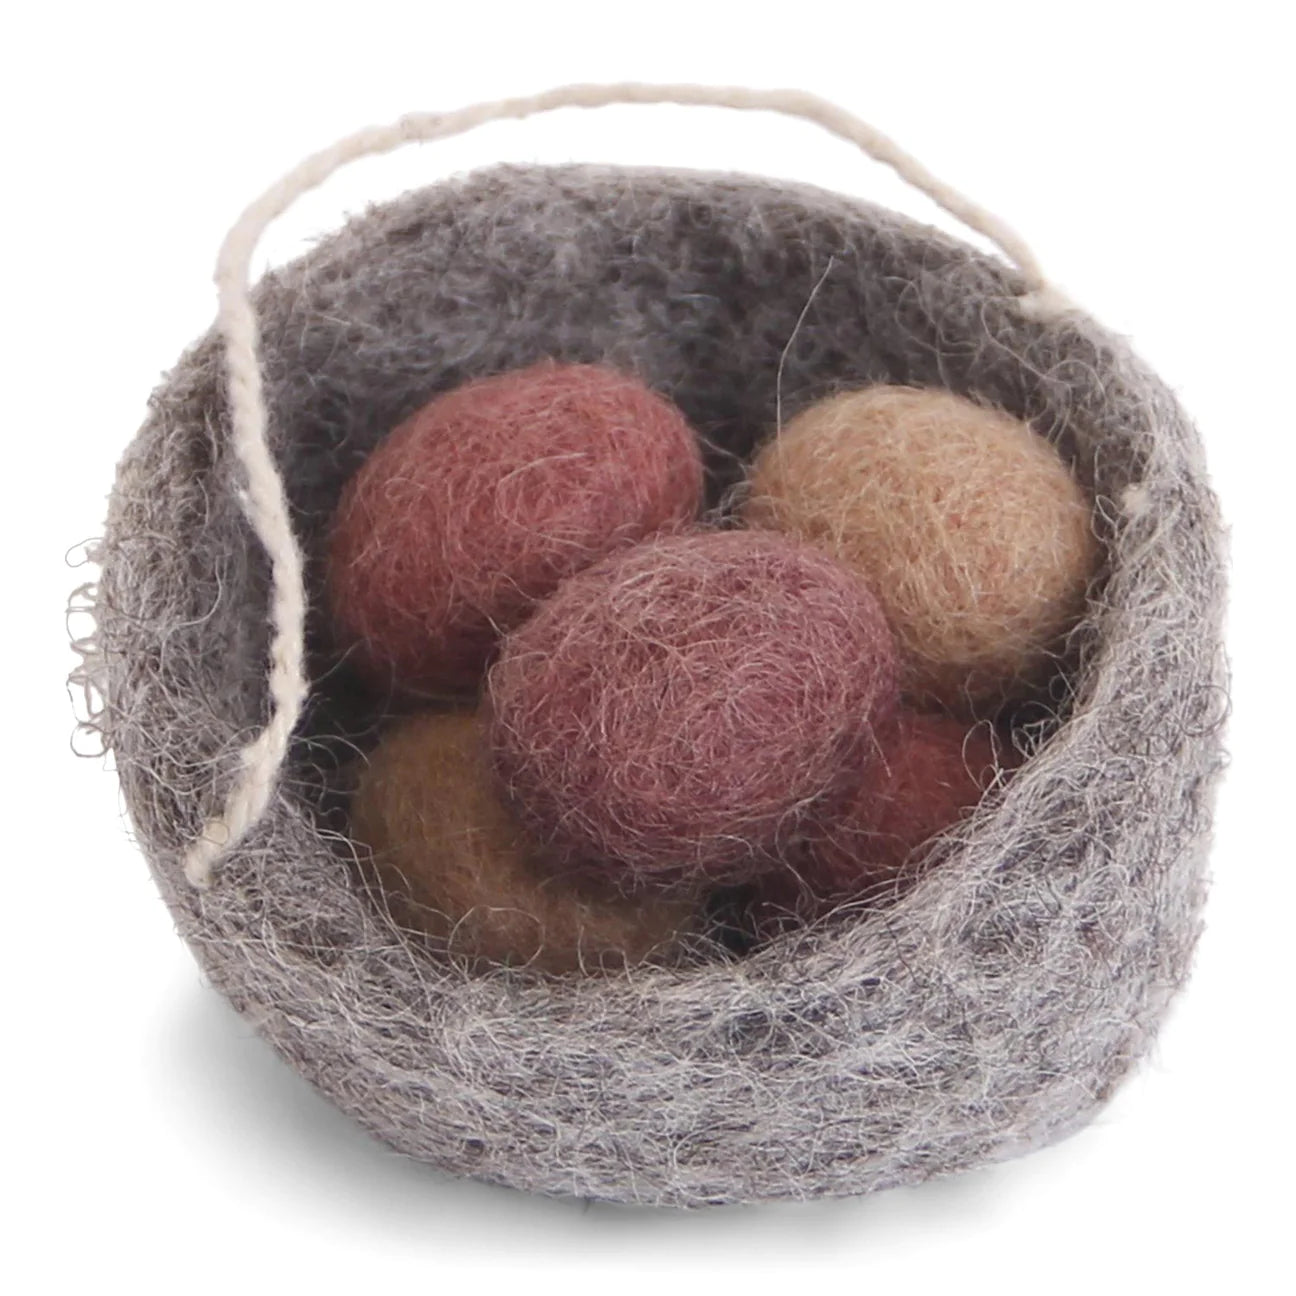 Wool Easter Eggs in a Nest